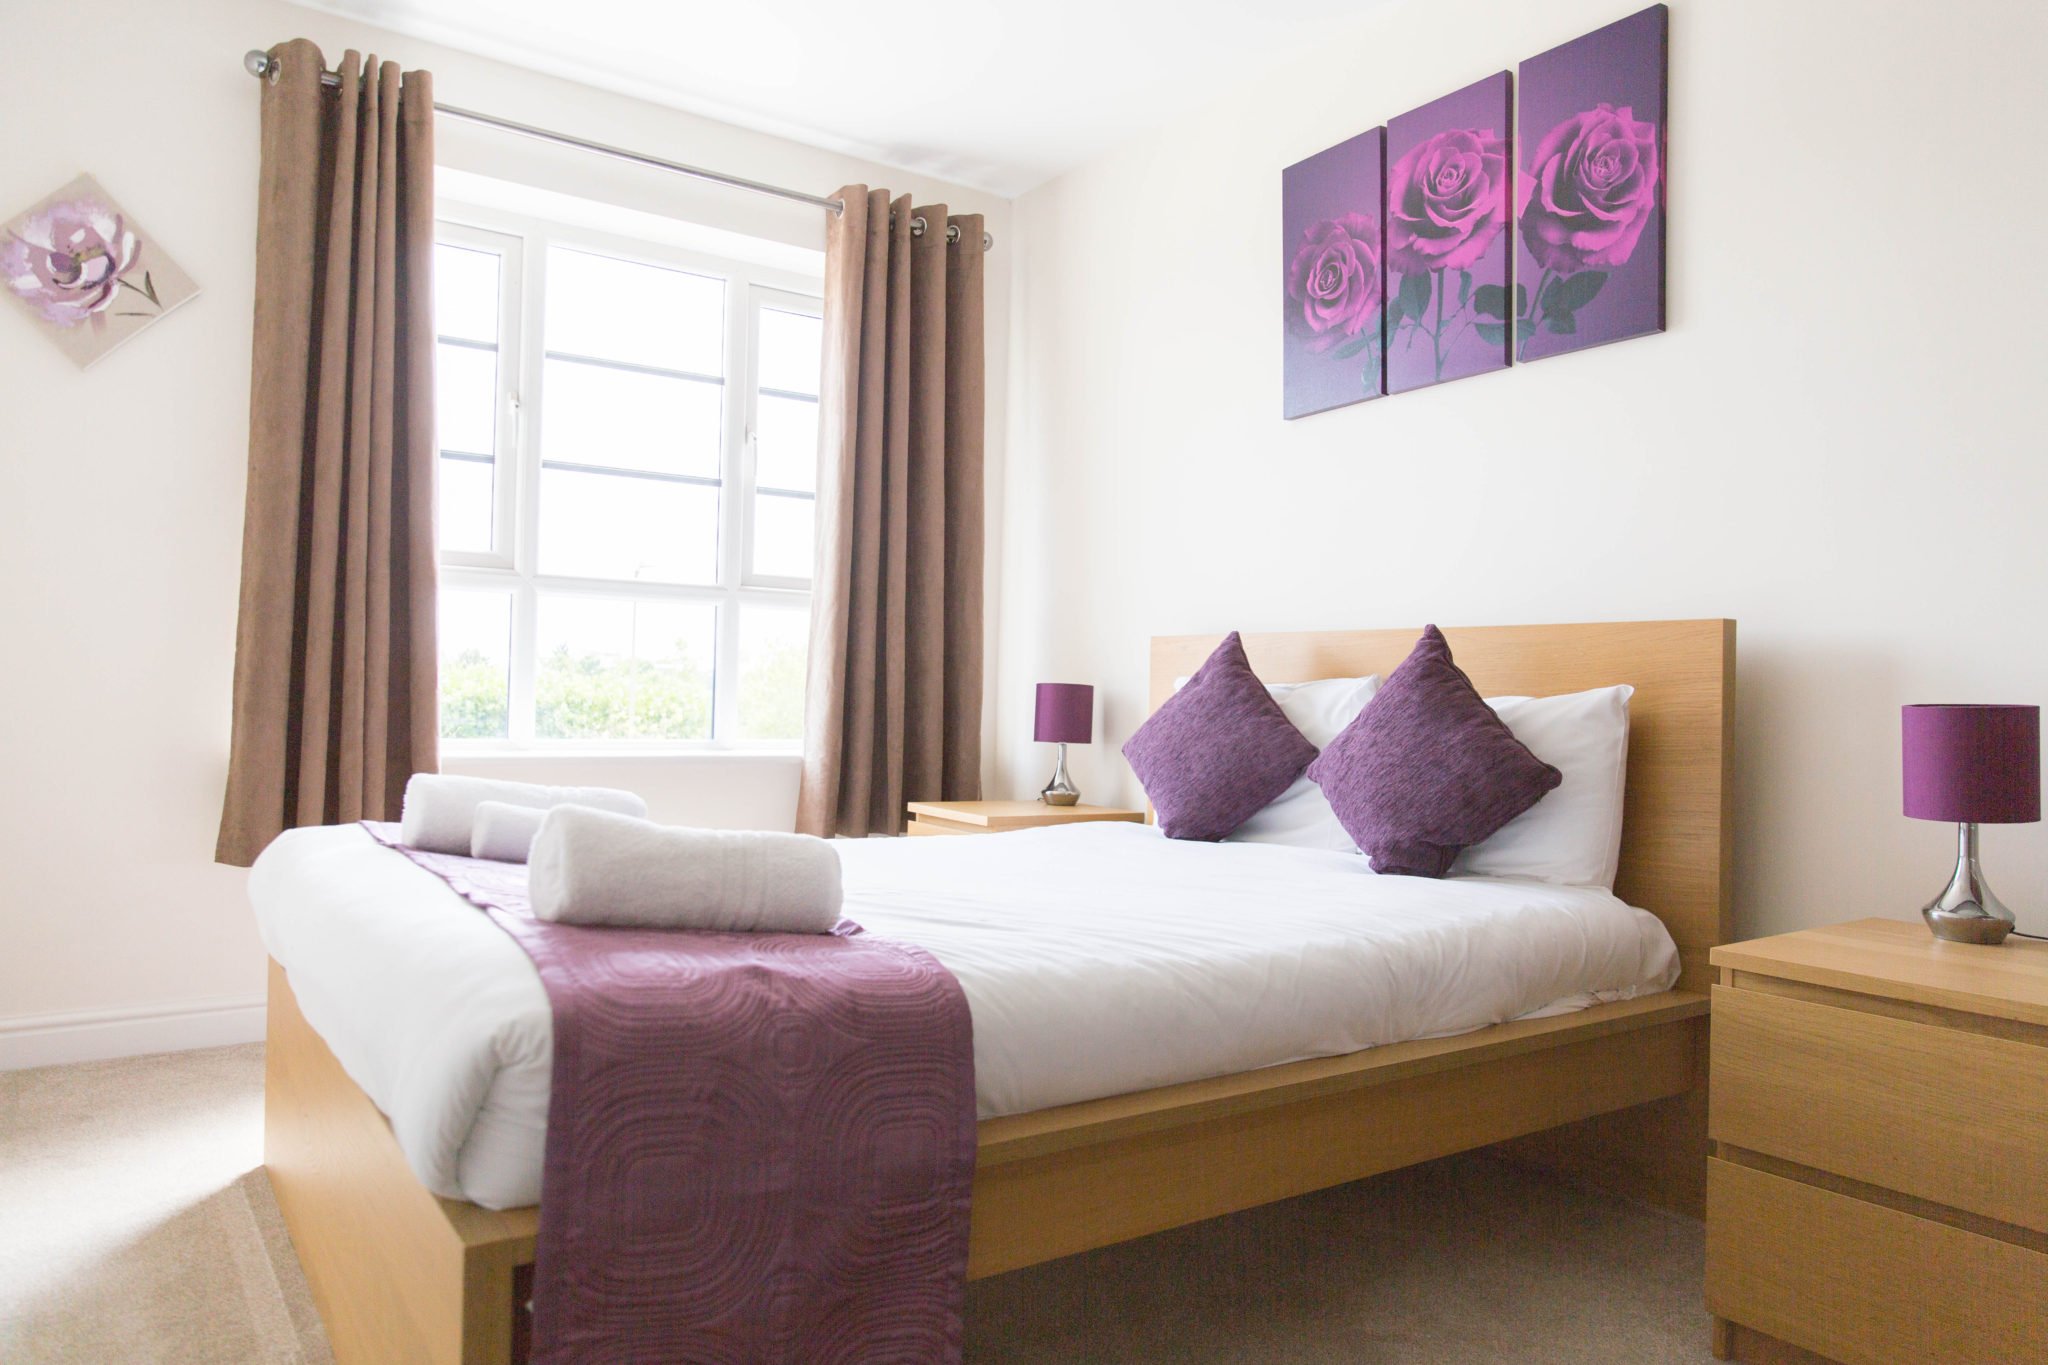 Farnborough Serviced Apartments Hampshire | Serviced Corporate Accommodation Farnborough Airport | Cheaper than hotels & more space | BEST RATES - BOOK NOW